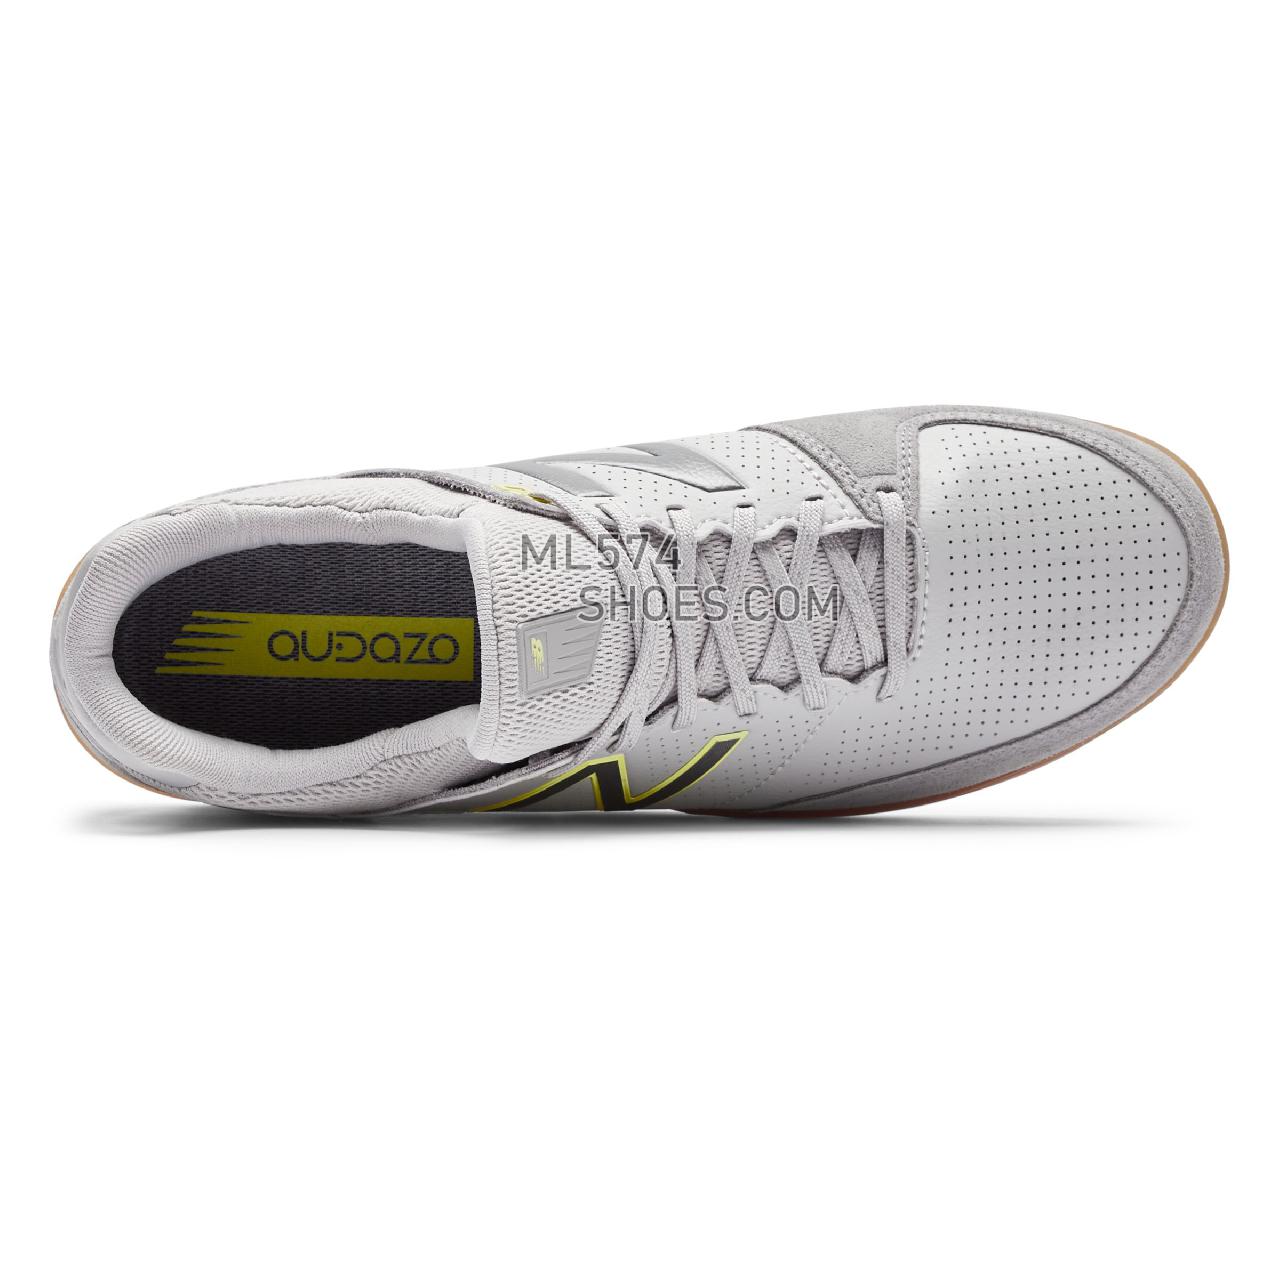 New Balance Audazo v4 Pro IN - Men's Audazo v4 Pro IN - Rain Cloud with Sulphur - MSAPIRS4